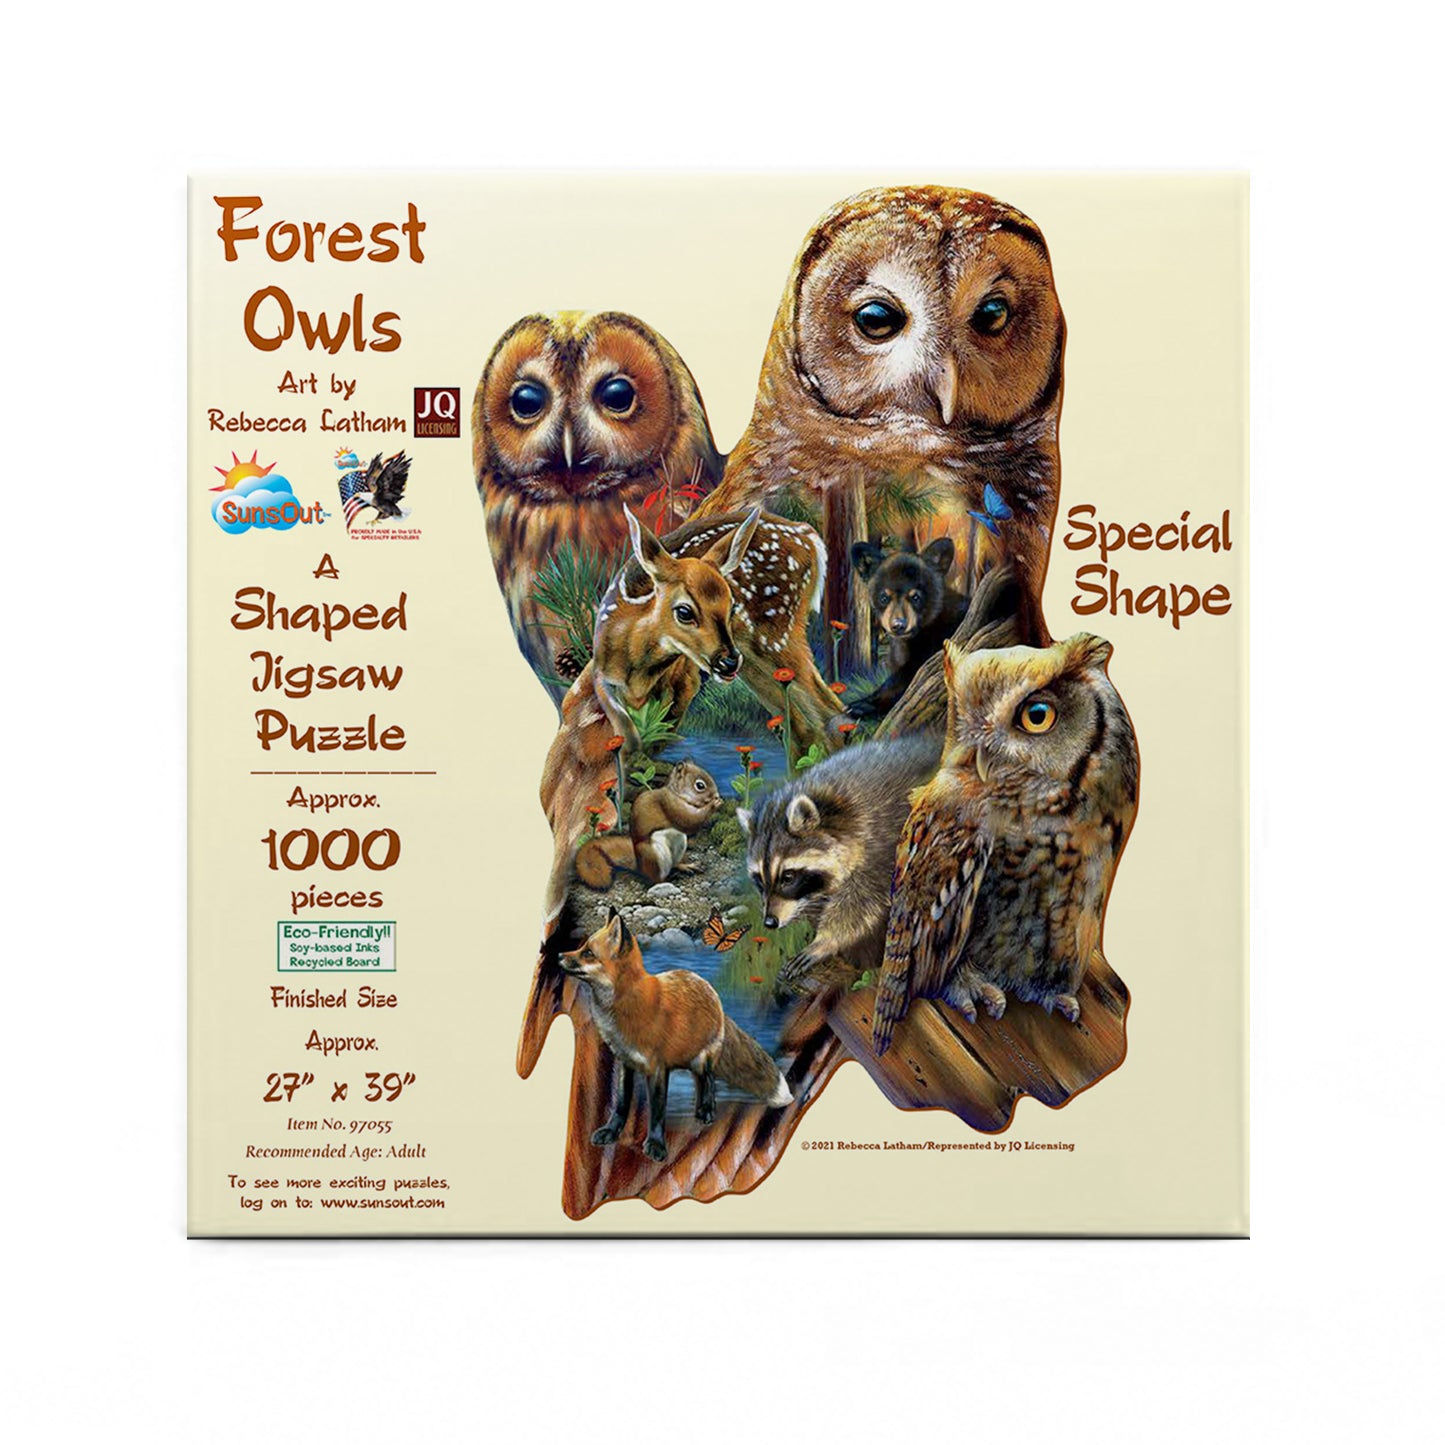 Forest Owls - Shaped 1000 Piece Jigsaw Puzzle